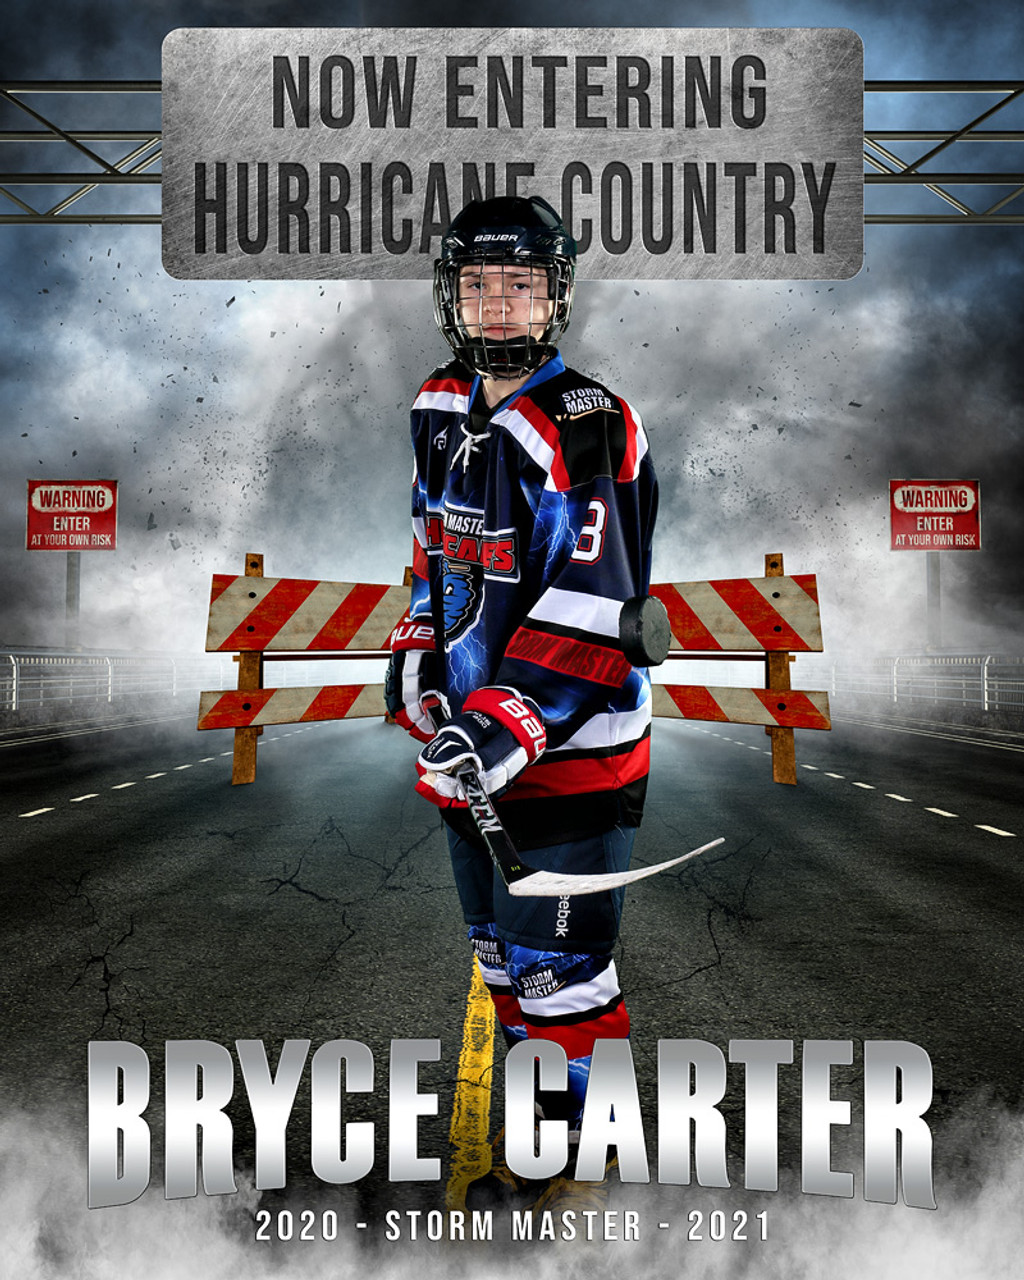 16x20 MULTI-SPORT POSTER TEMPLATE - STORM MASTER - CUSTOM PHOTOSHOP LAYERED SPORTS TEMPLATE